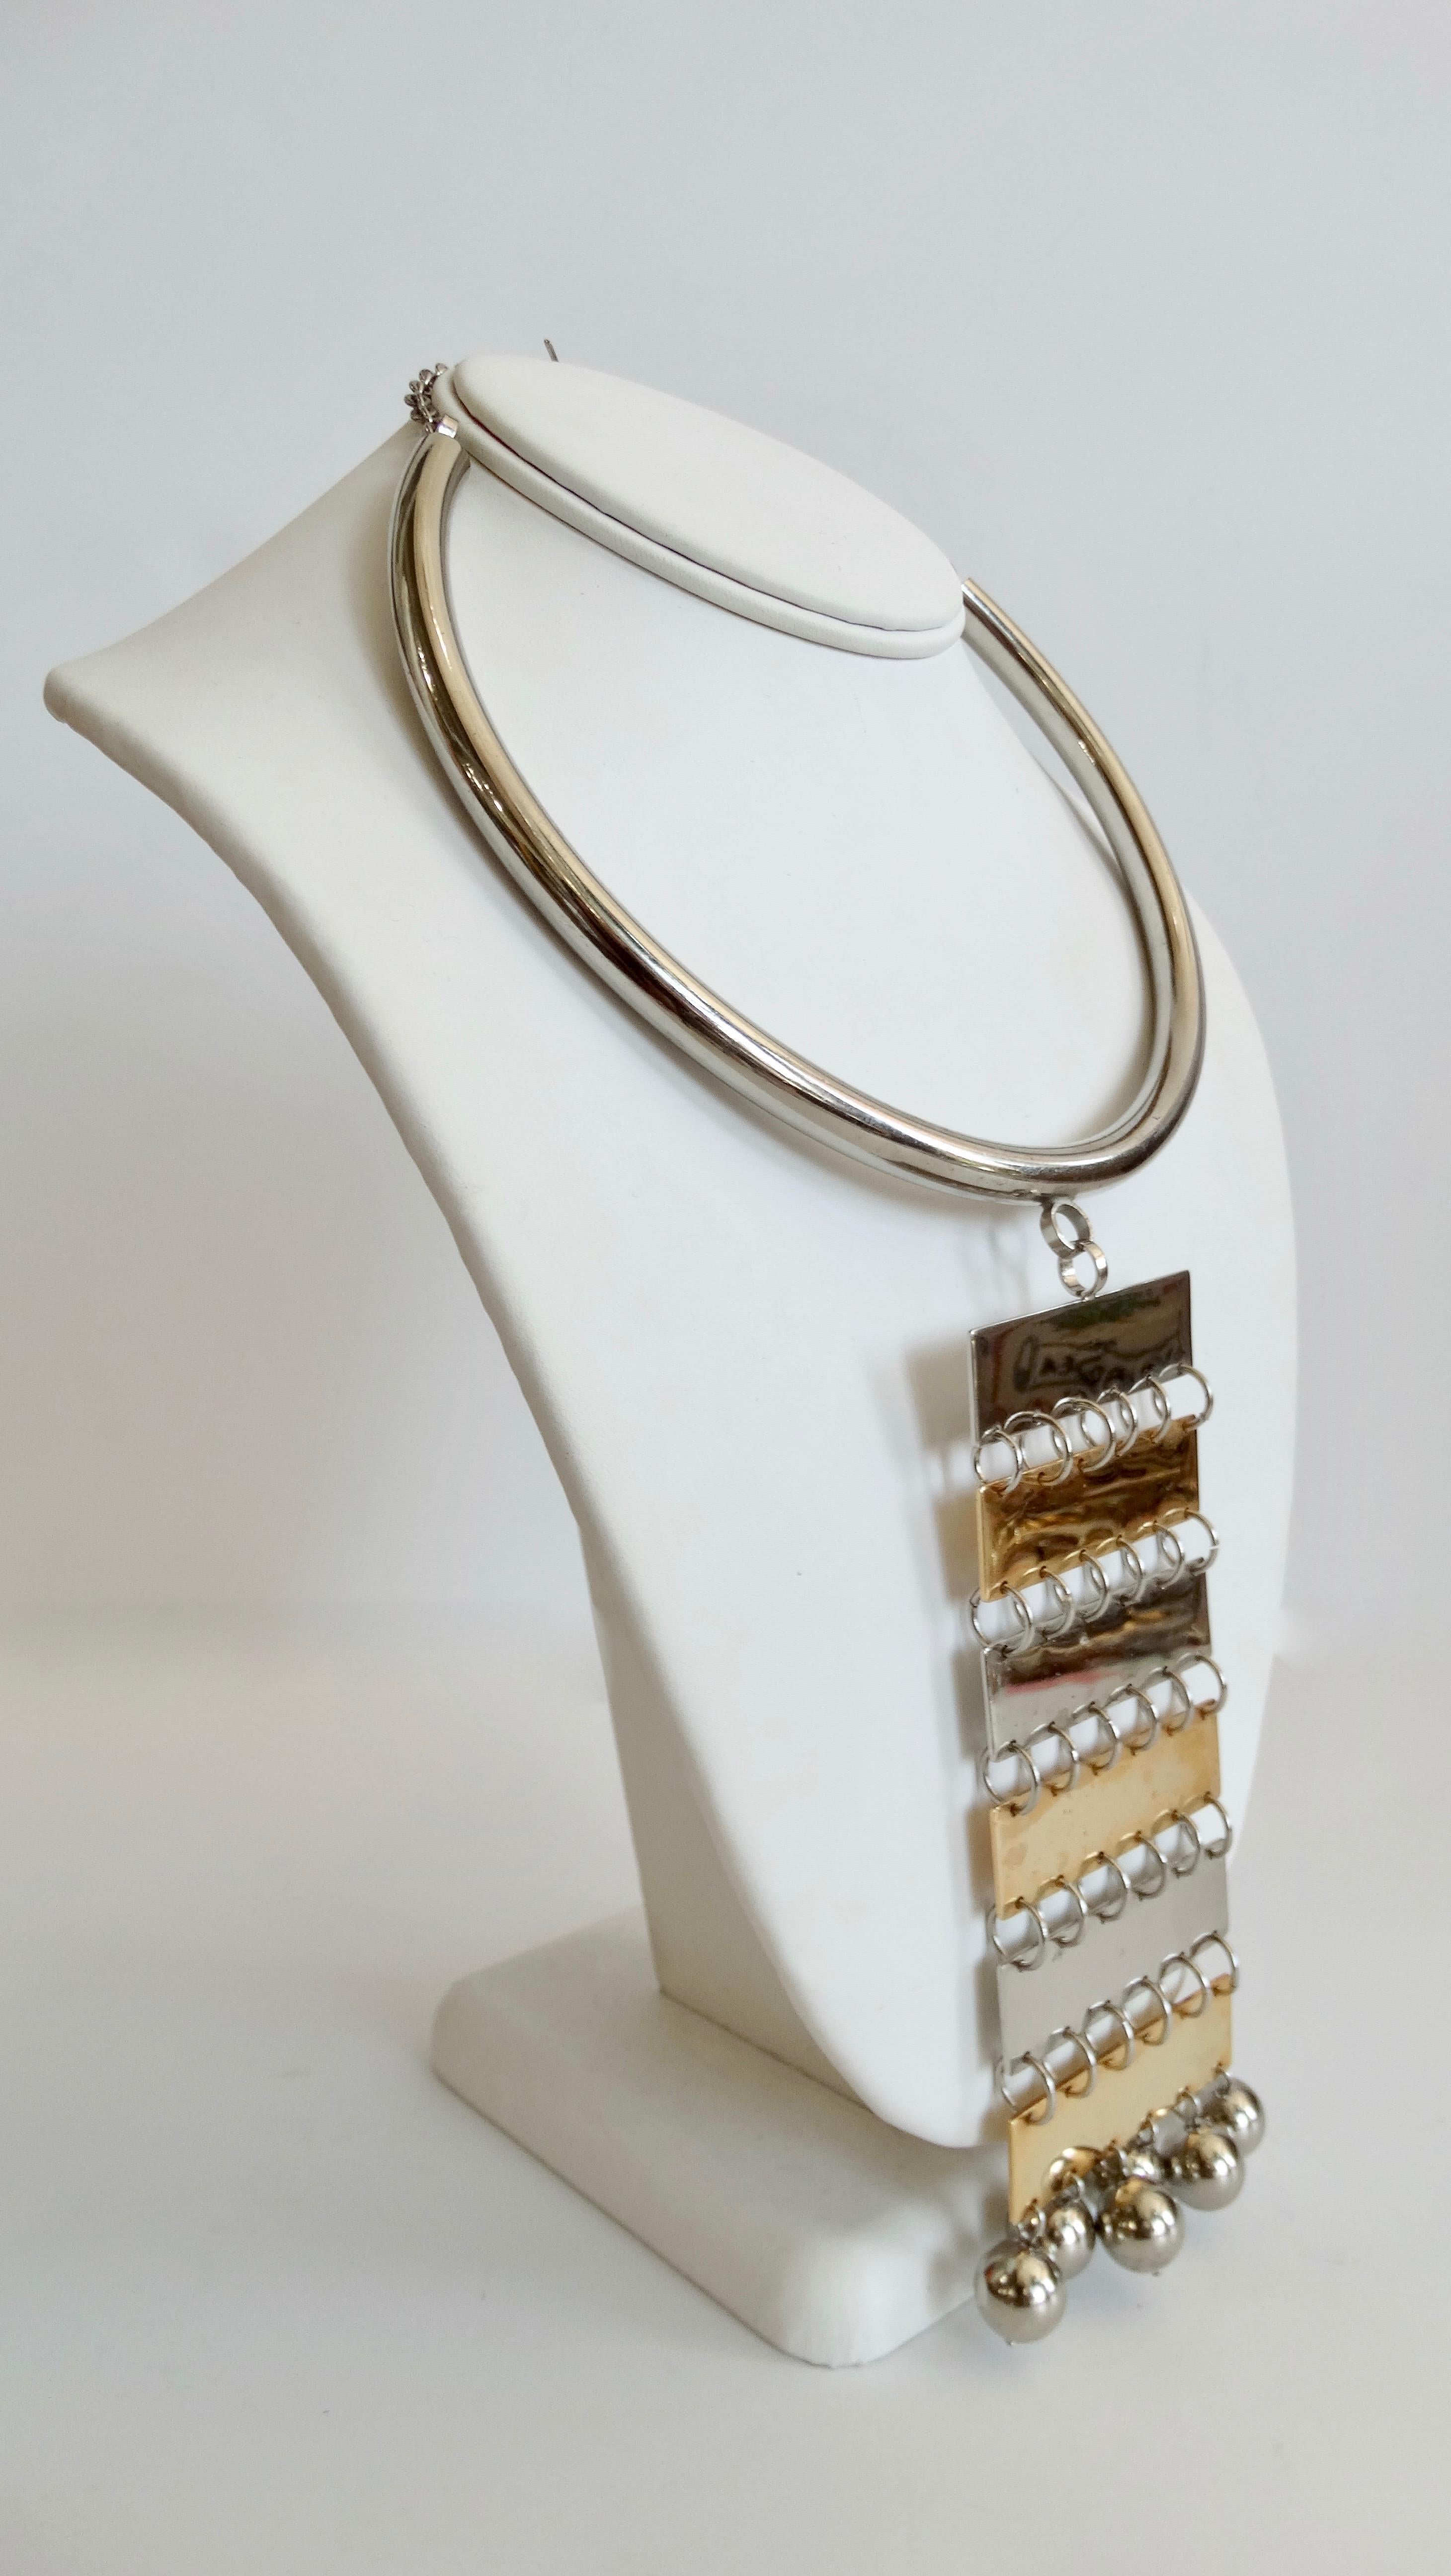 Elevate your outfit with this amazing artisan crafted choker necklace! Think Pierre Cardin Circa 1960s, this mixed metal necklace is plated in silver and gold. Features a thick silver plated band and a two-tone long chain-link pendant accented with